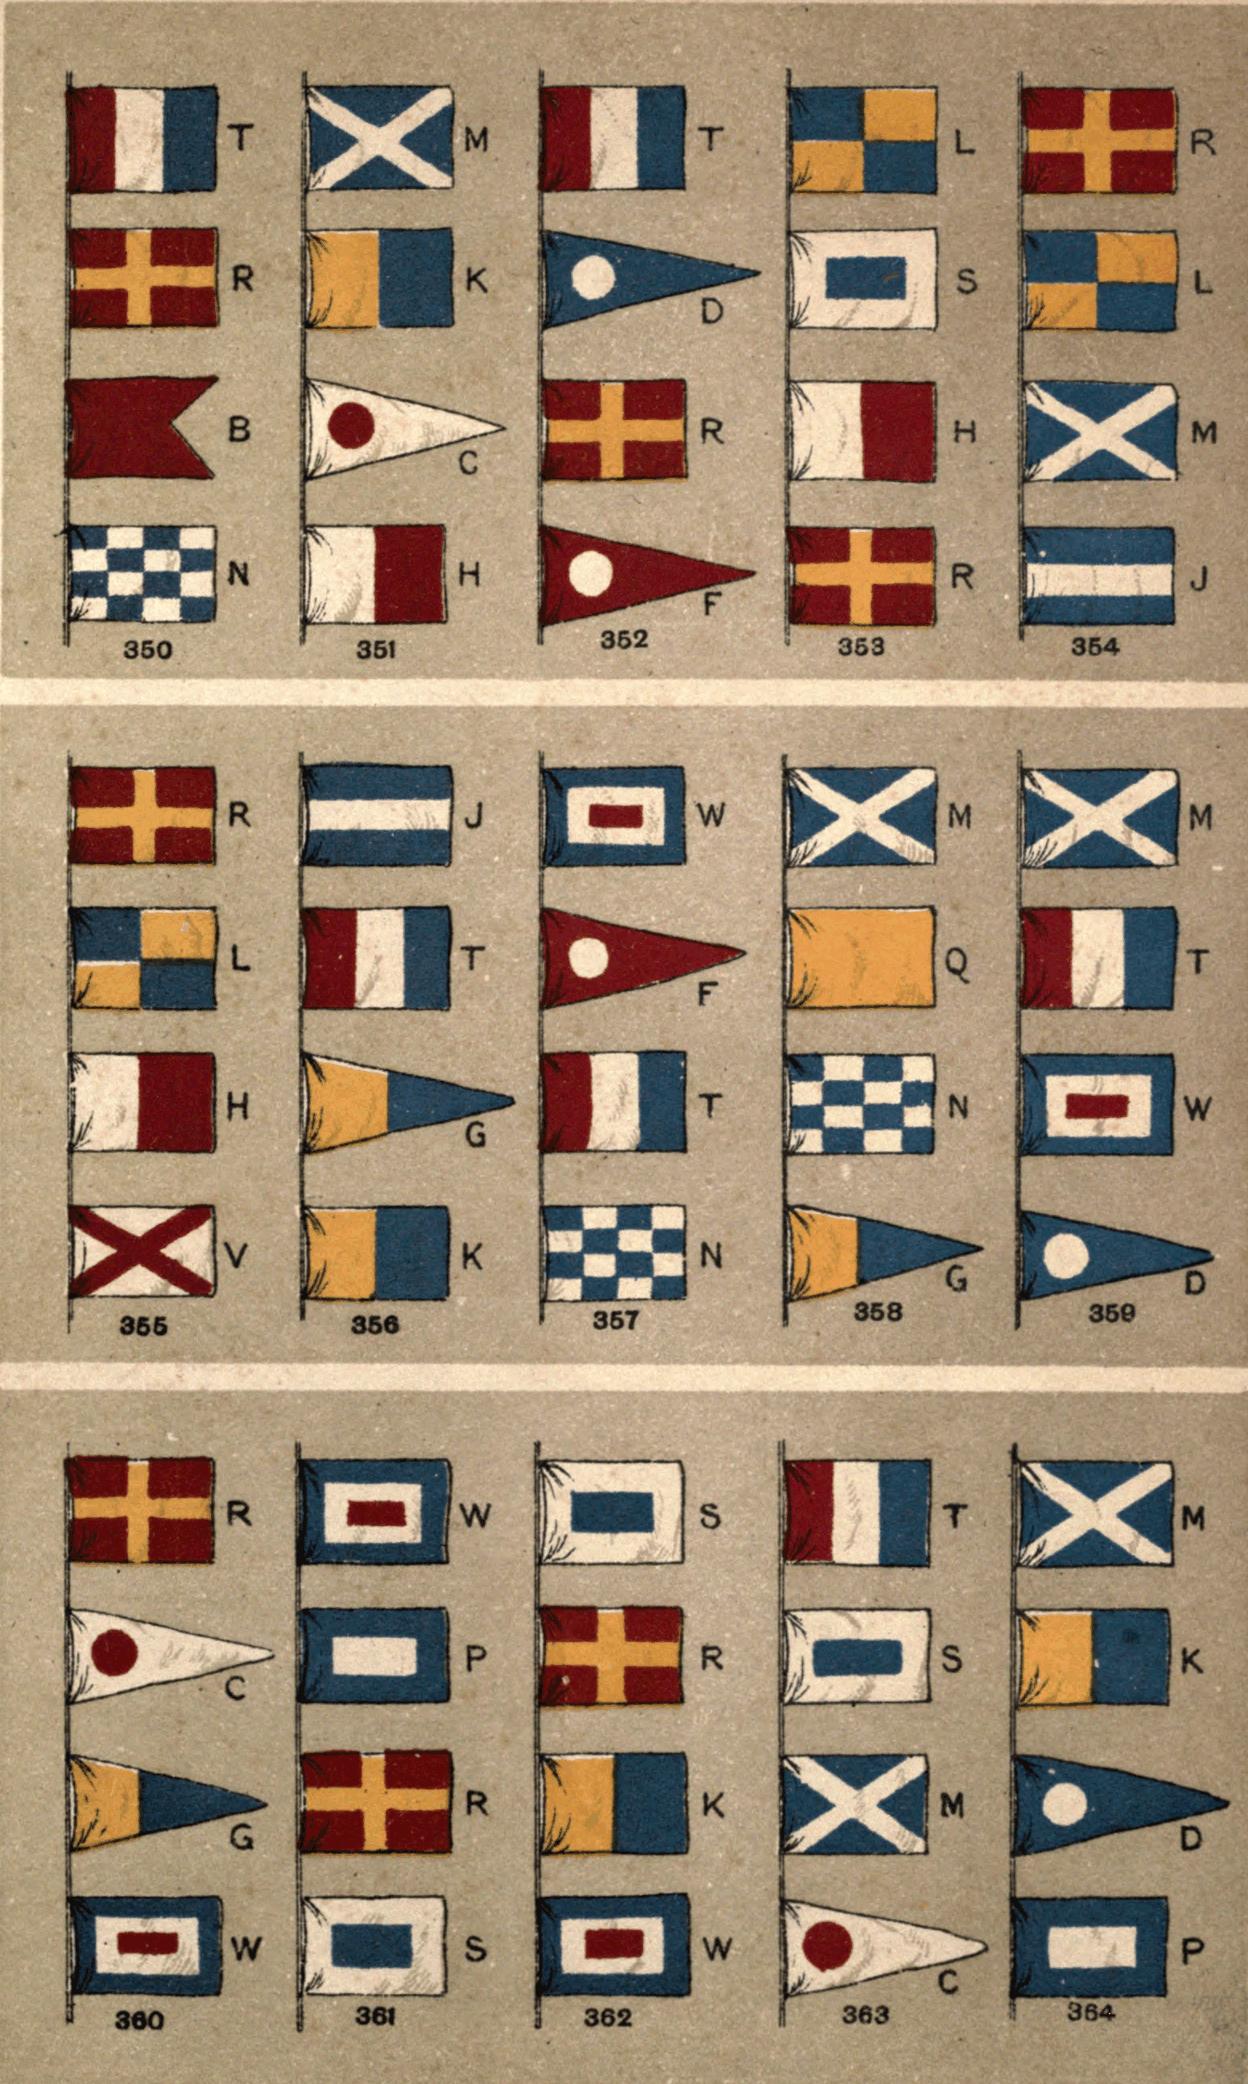 The Project Gutenberg eBook of The Flags of the World, by F. Edward Hulme